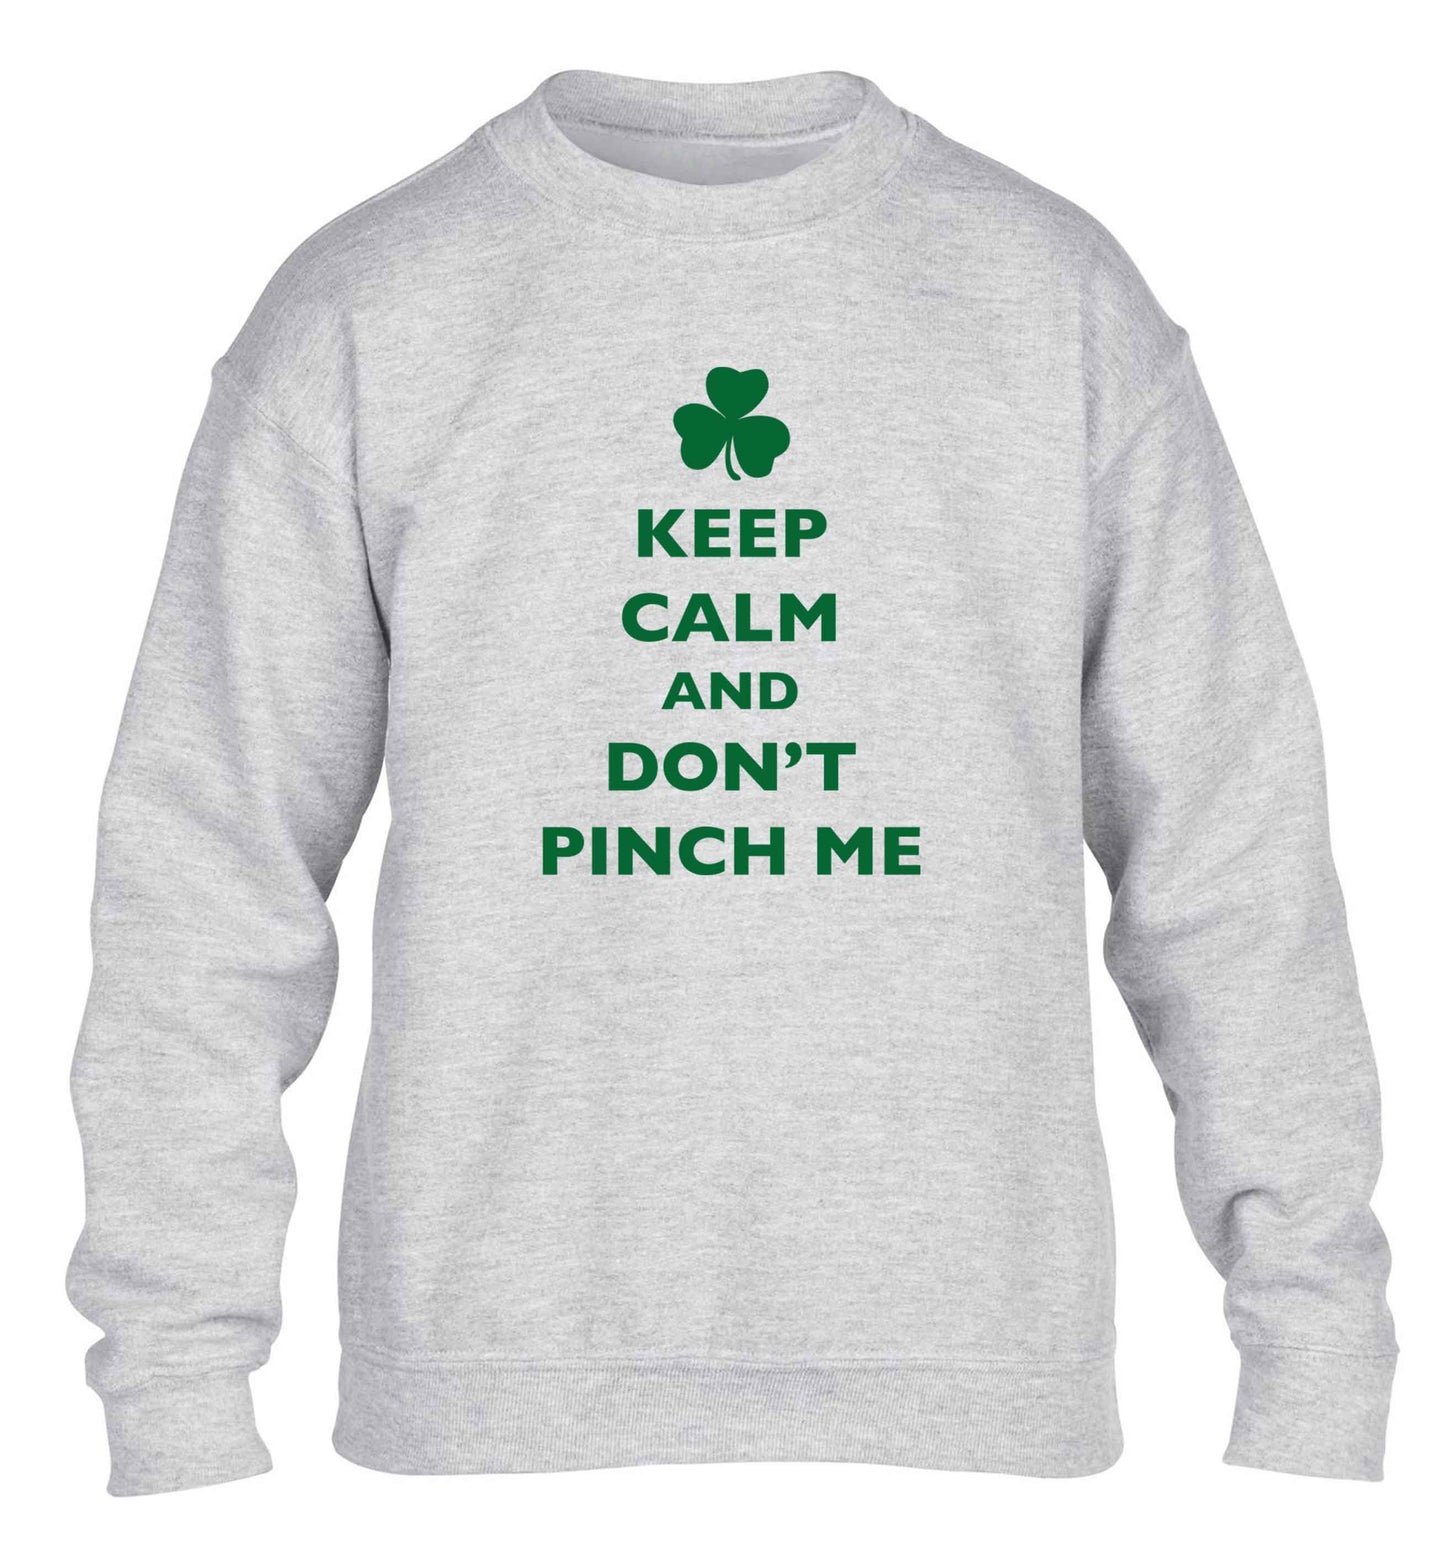 Keep calm and don't pinch me children's grey sweater 12-13 Years